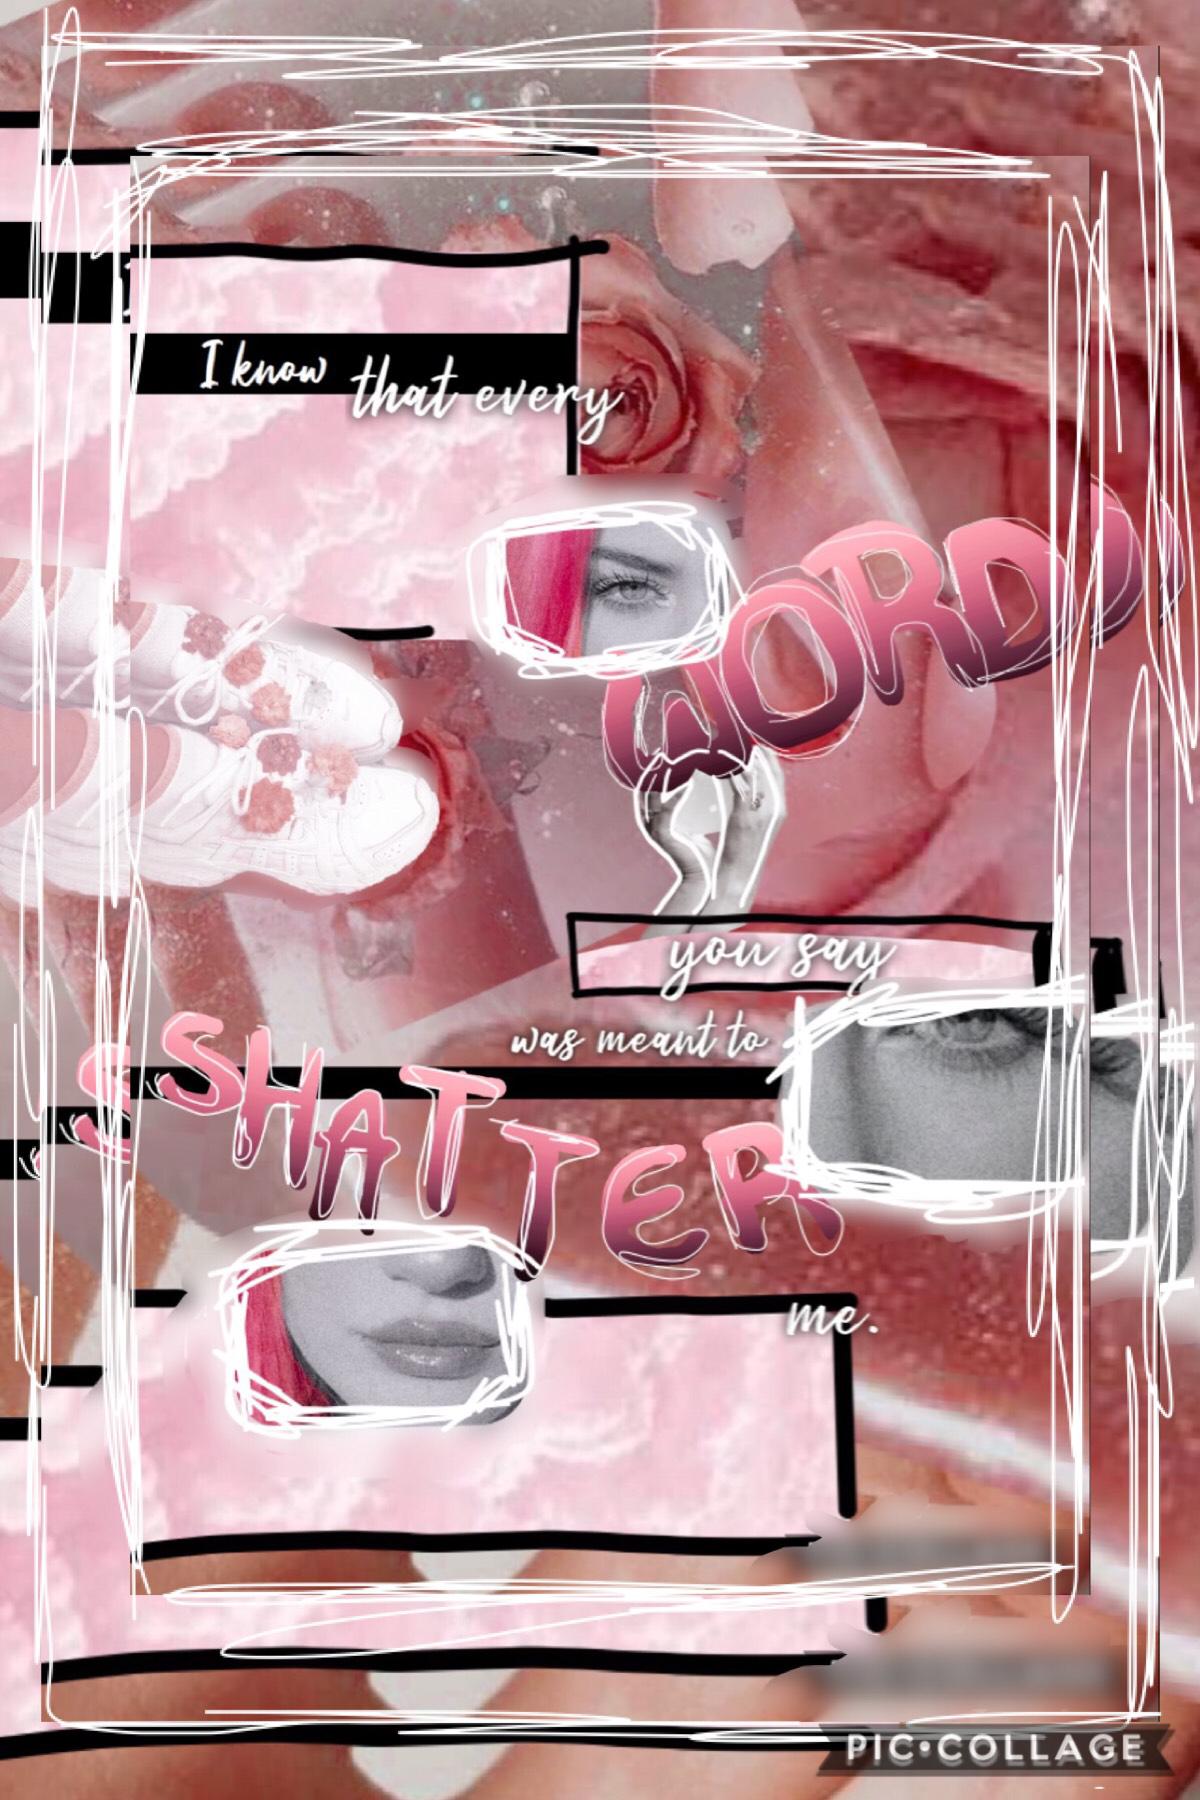 clickkk 💔

-heya ppl, this is one of my first not very happy collages...lol that sounded so cringy 😤
This is my entry to the Asthetic Colour Contest 🌈mine is obviously pink] and it would mean a million if you guys could like it in my remixes ♥️💫 

...if y